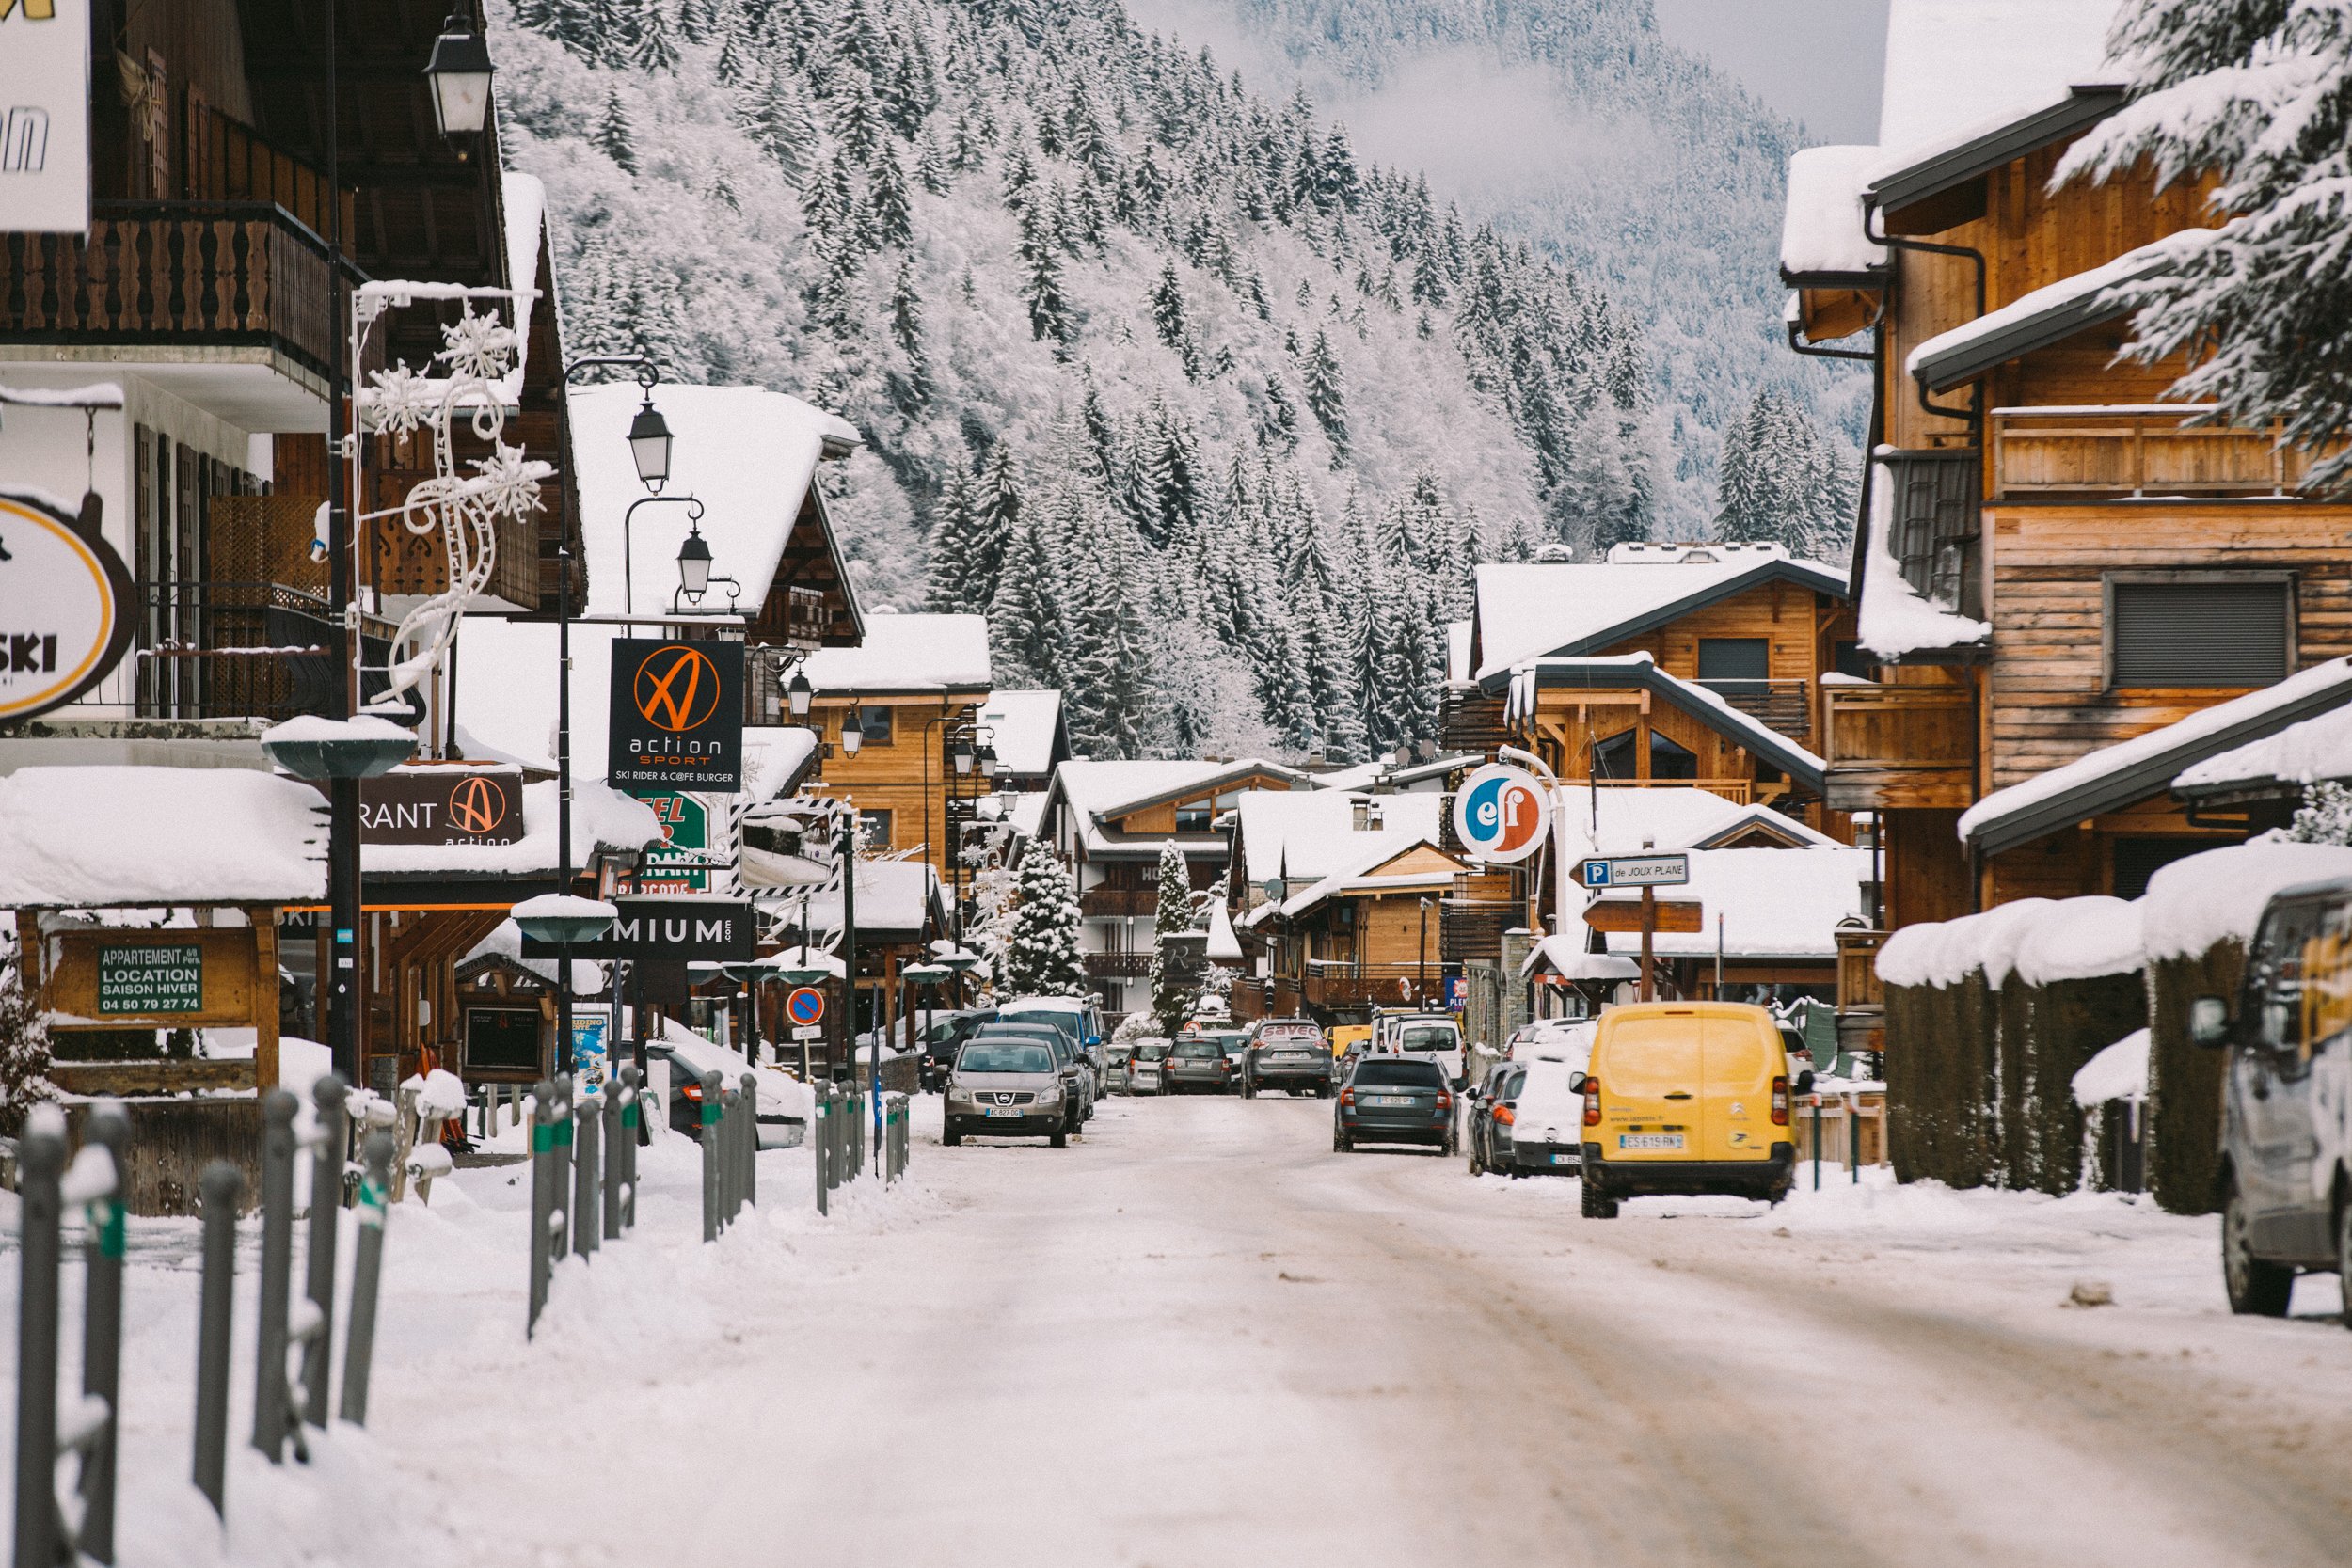 A shopping street in Morzine in the snow where Chilly Powder is located.